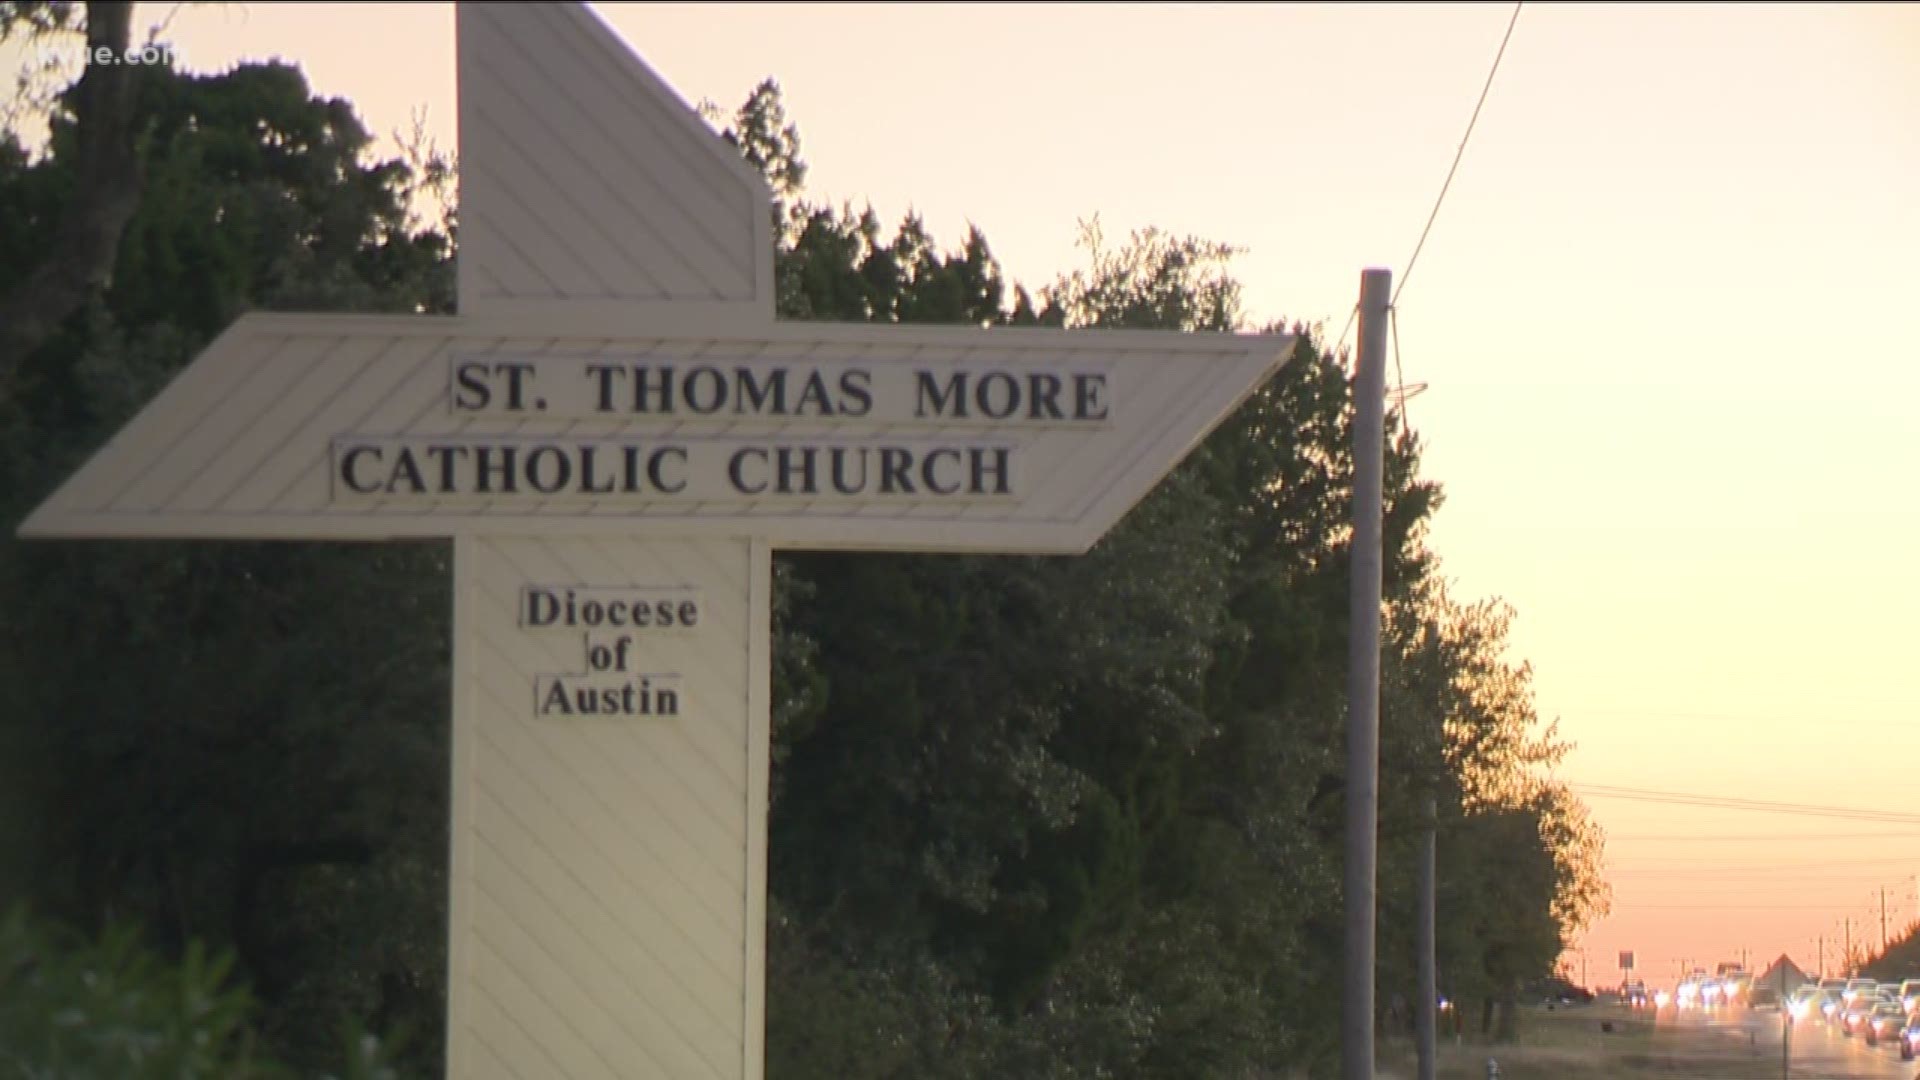 The women spoke out and are claiming they were ignored. Six women claim their priest at Austin's St. Thomas Moore Catholic Church sexually assaulted and harassed them while they were in the confessional.
STORY: http://www.kvue.com/news/local/catholic-dioc